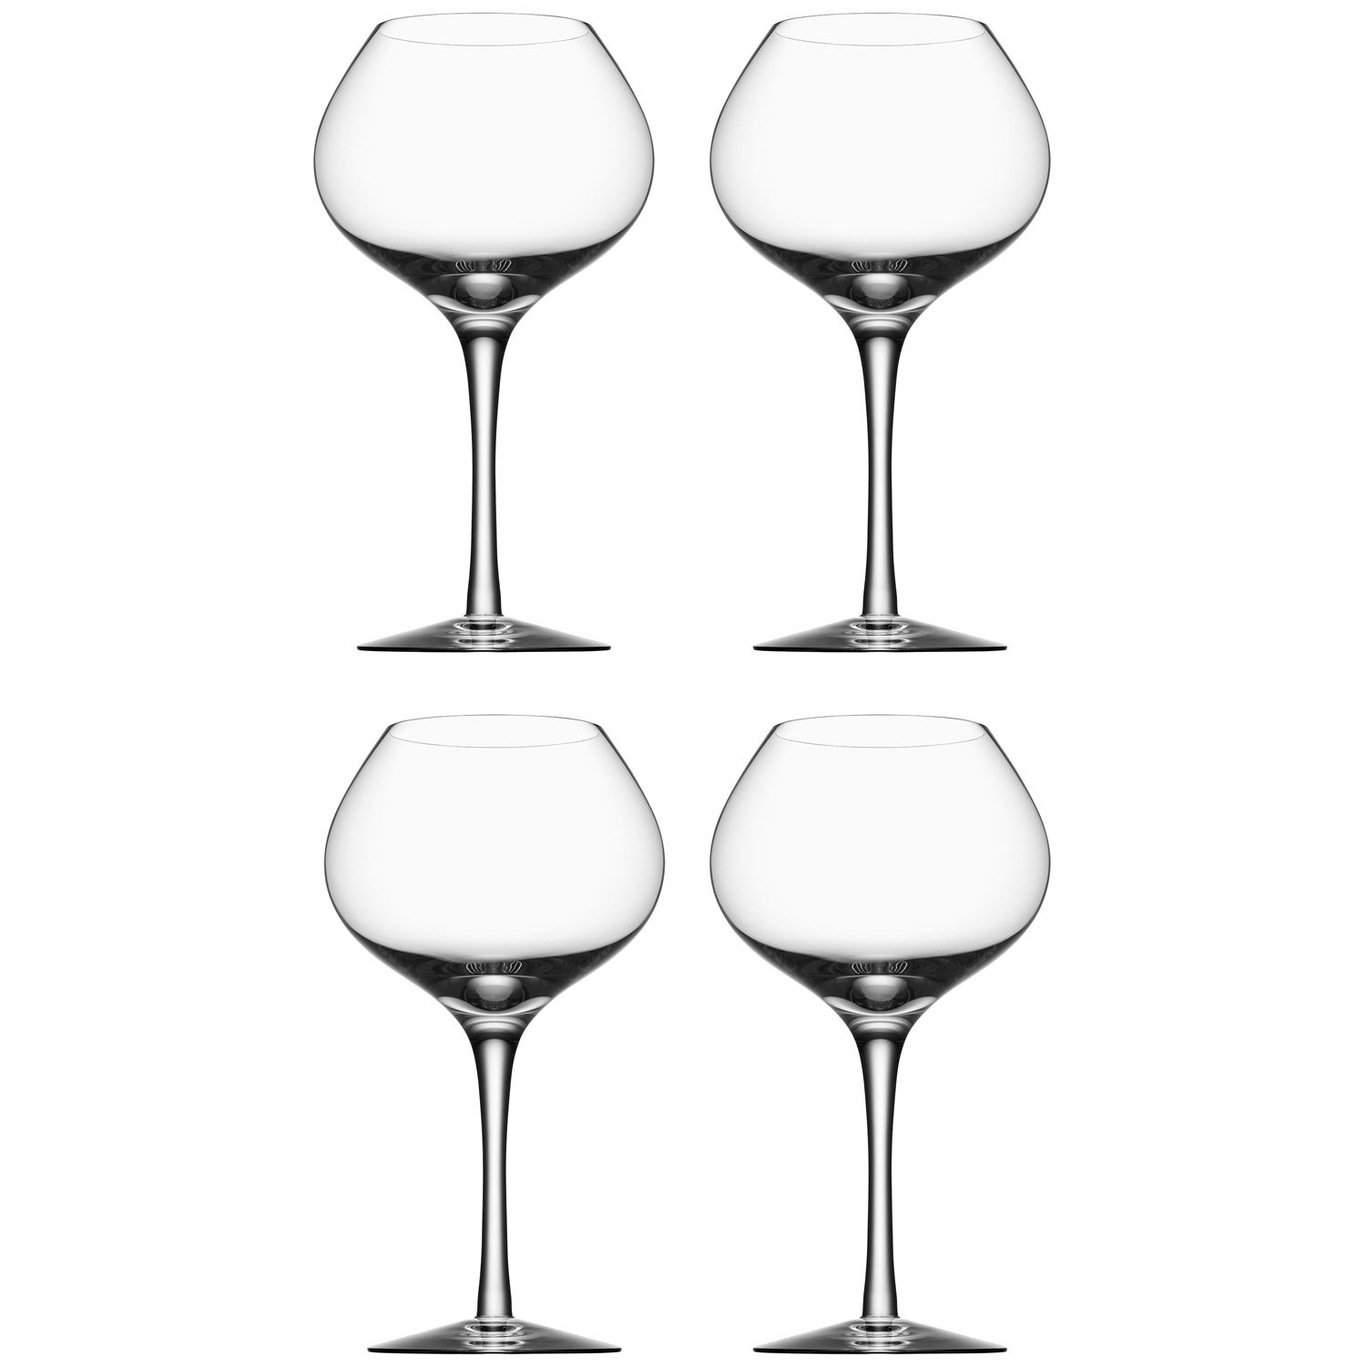 More More Wine - Set of 4 - Orrefors US